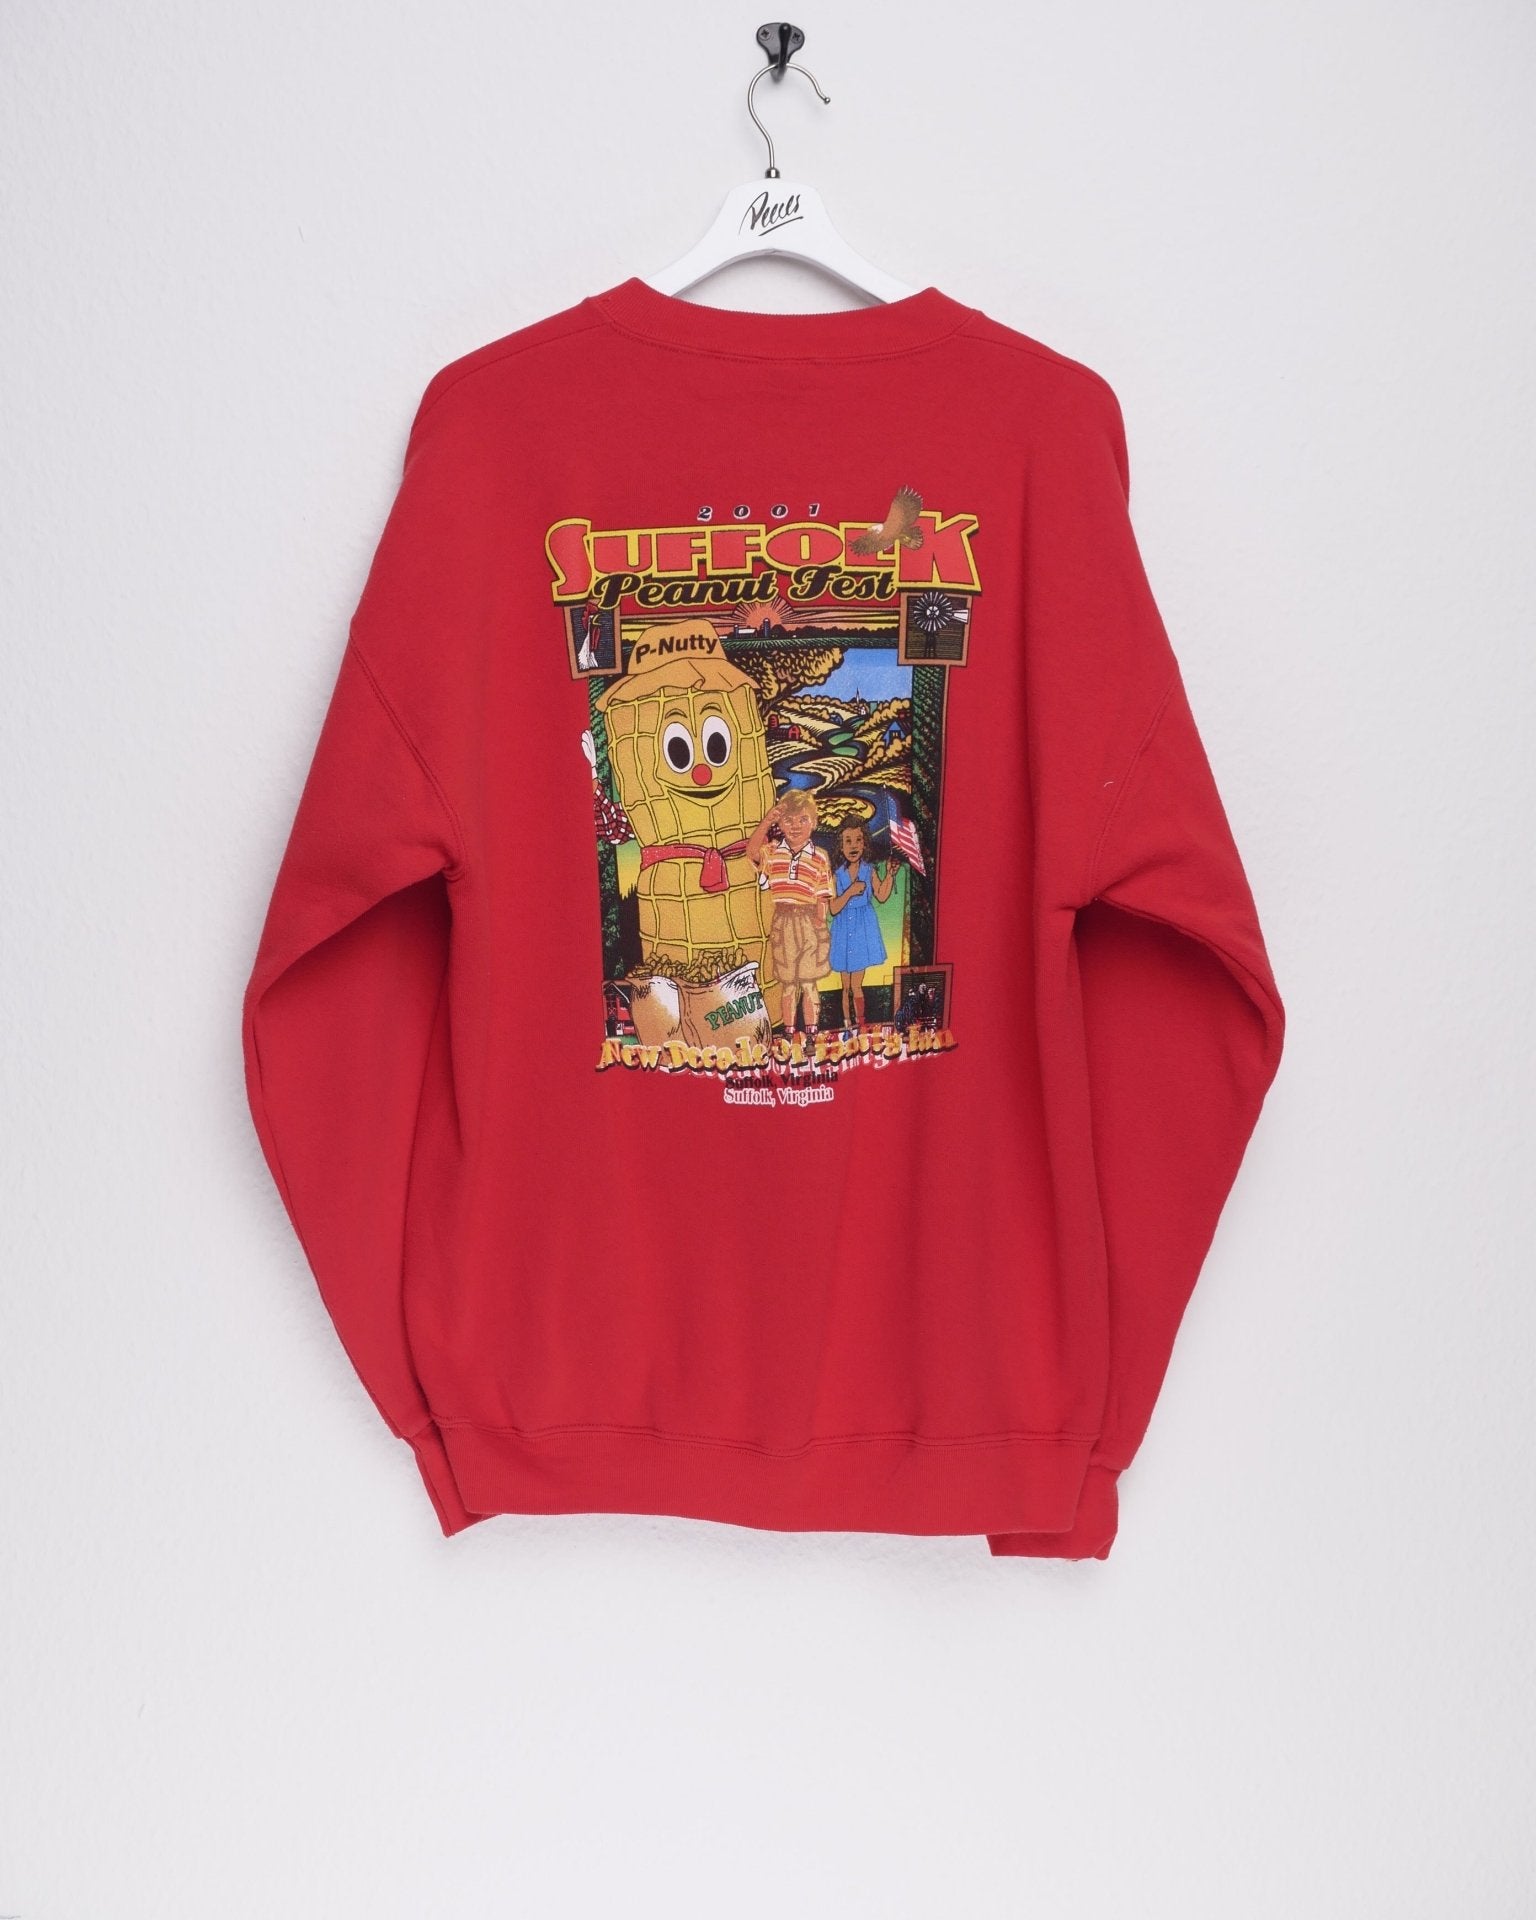 Suffolk Peanut Fest printed Graphic red Sweater - Peeces